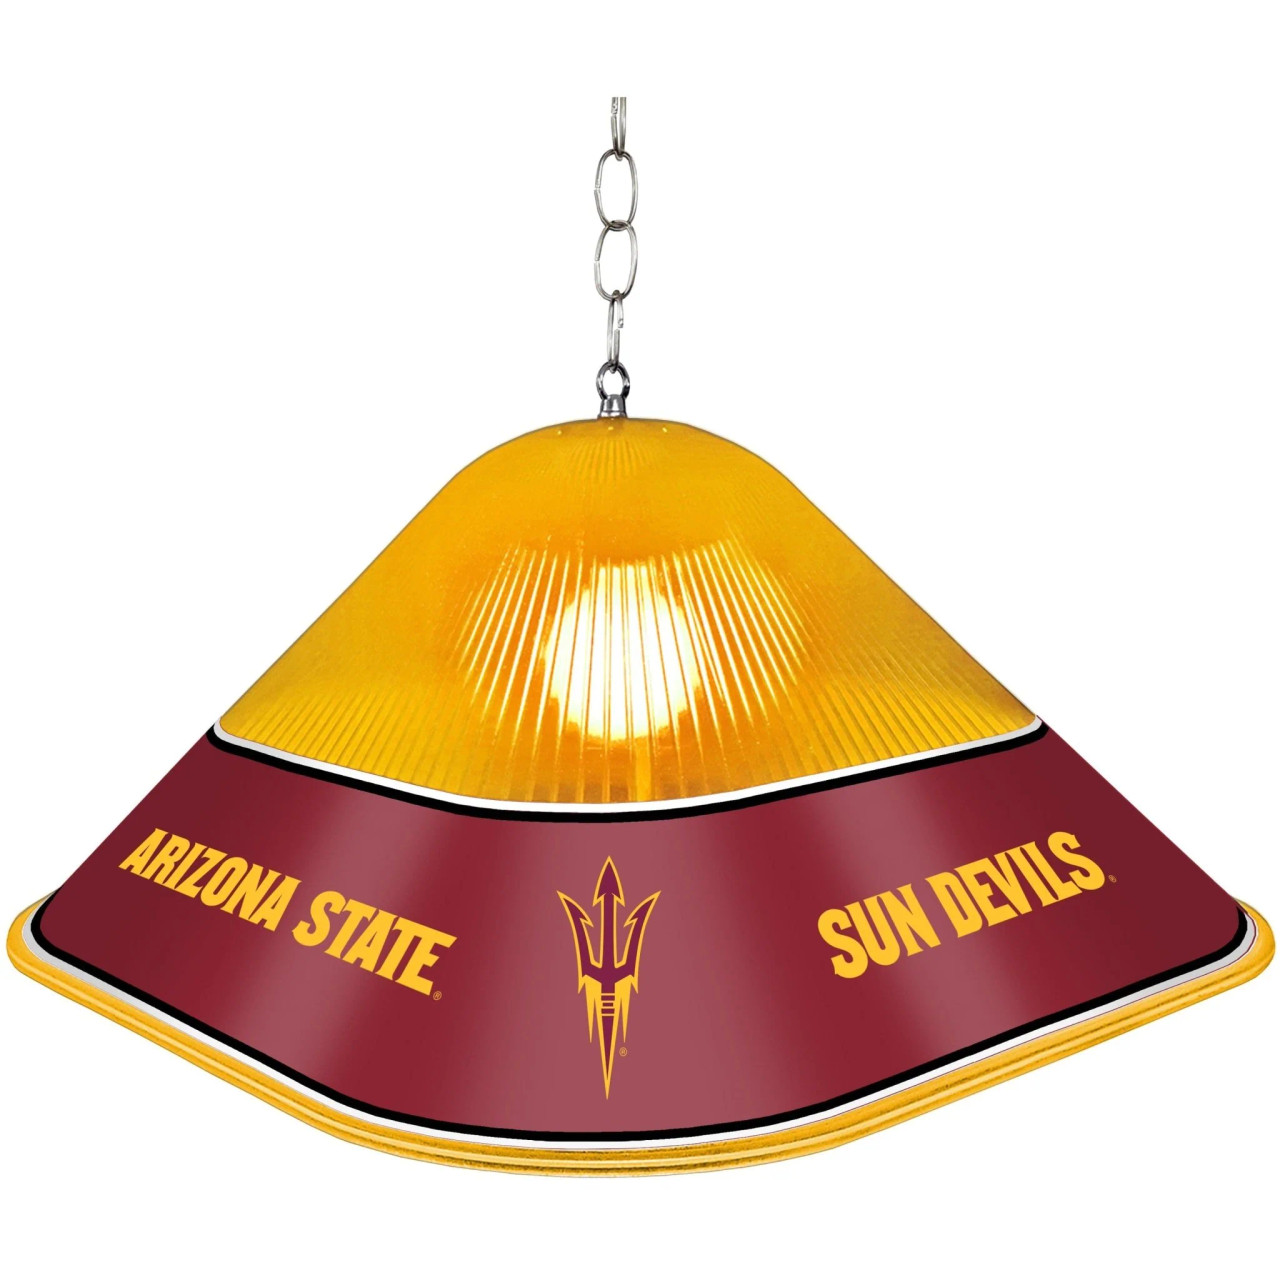 Arizona, State, Sun, Devils, Game, Room, Cave, Table, Light, Lamp,NCAZST-410-01, The Fan-Brand, 686082111980